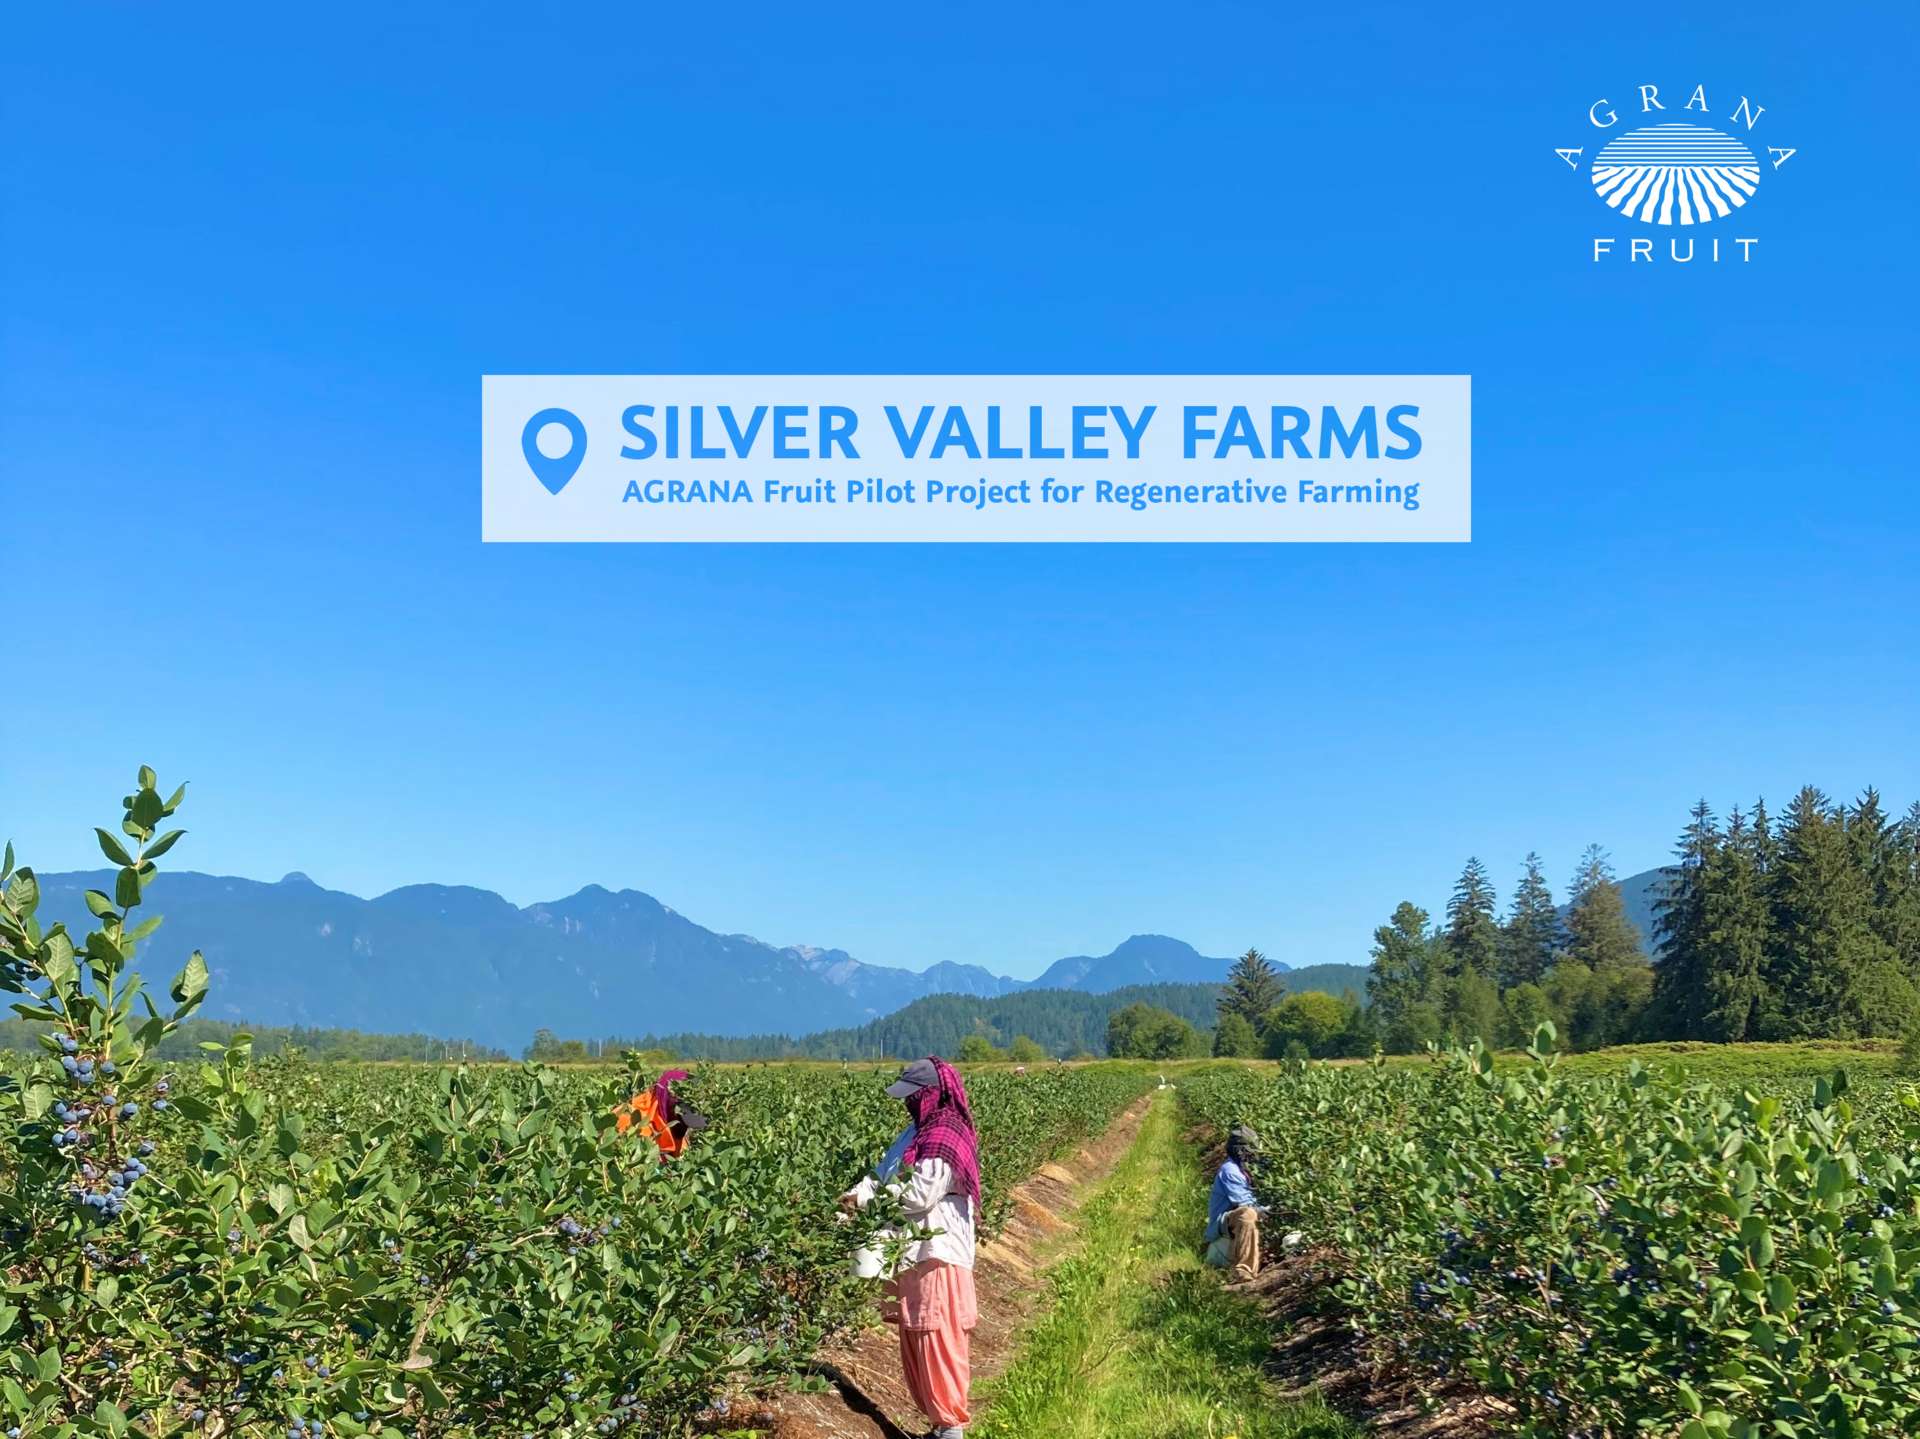 Silver valley farms- AGRANA Fruit Pilot Project for regenerative farming of fruits